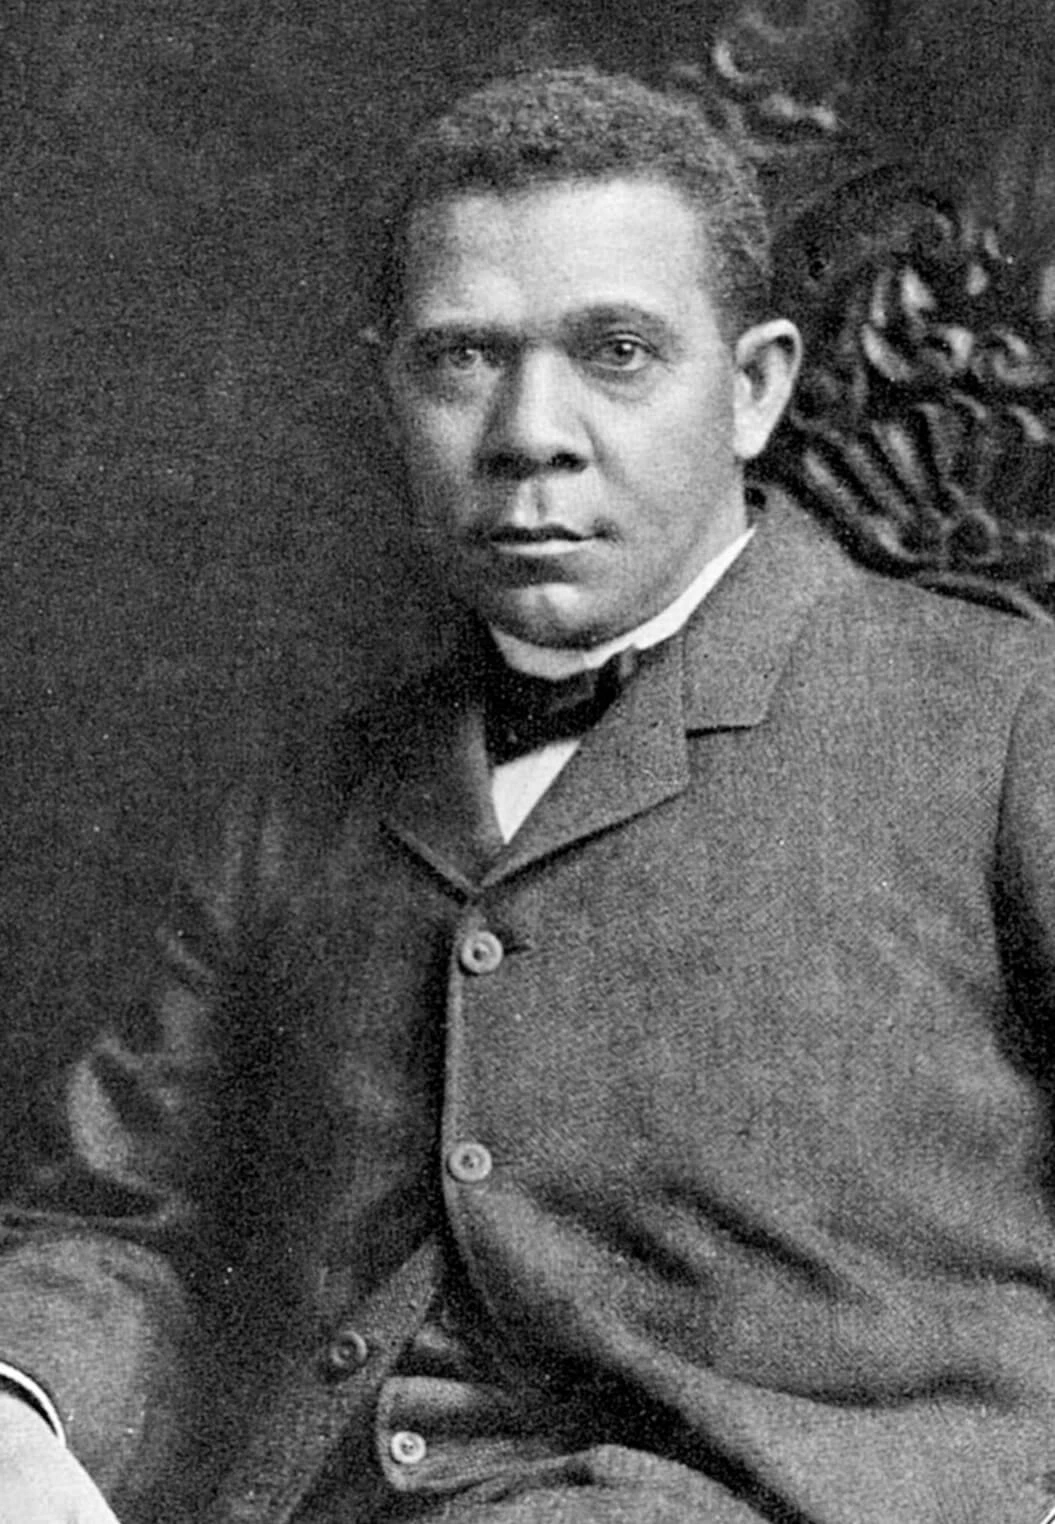 Black and white photo of a Black man sitting in a chair. He is wearing a suit with bowtie